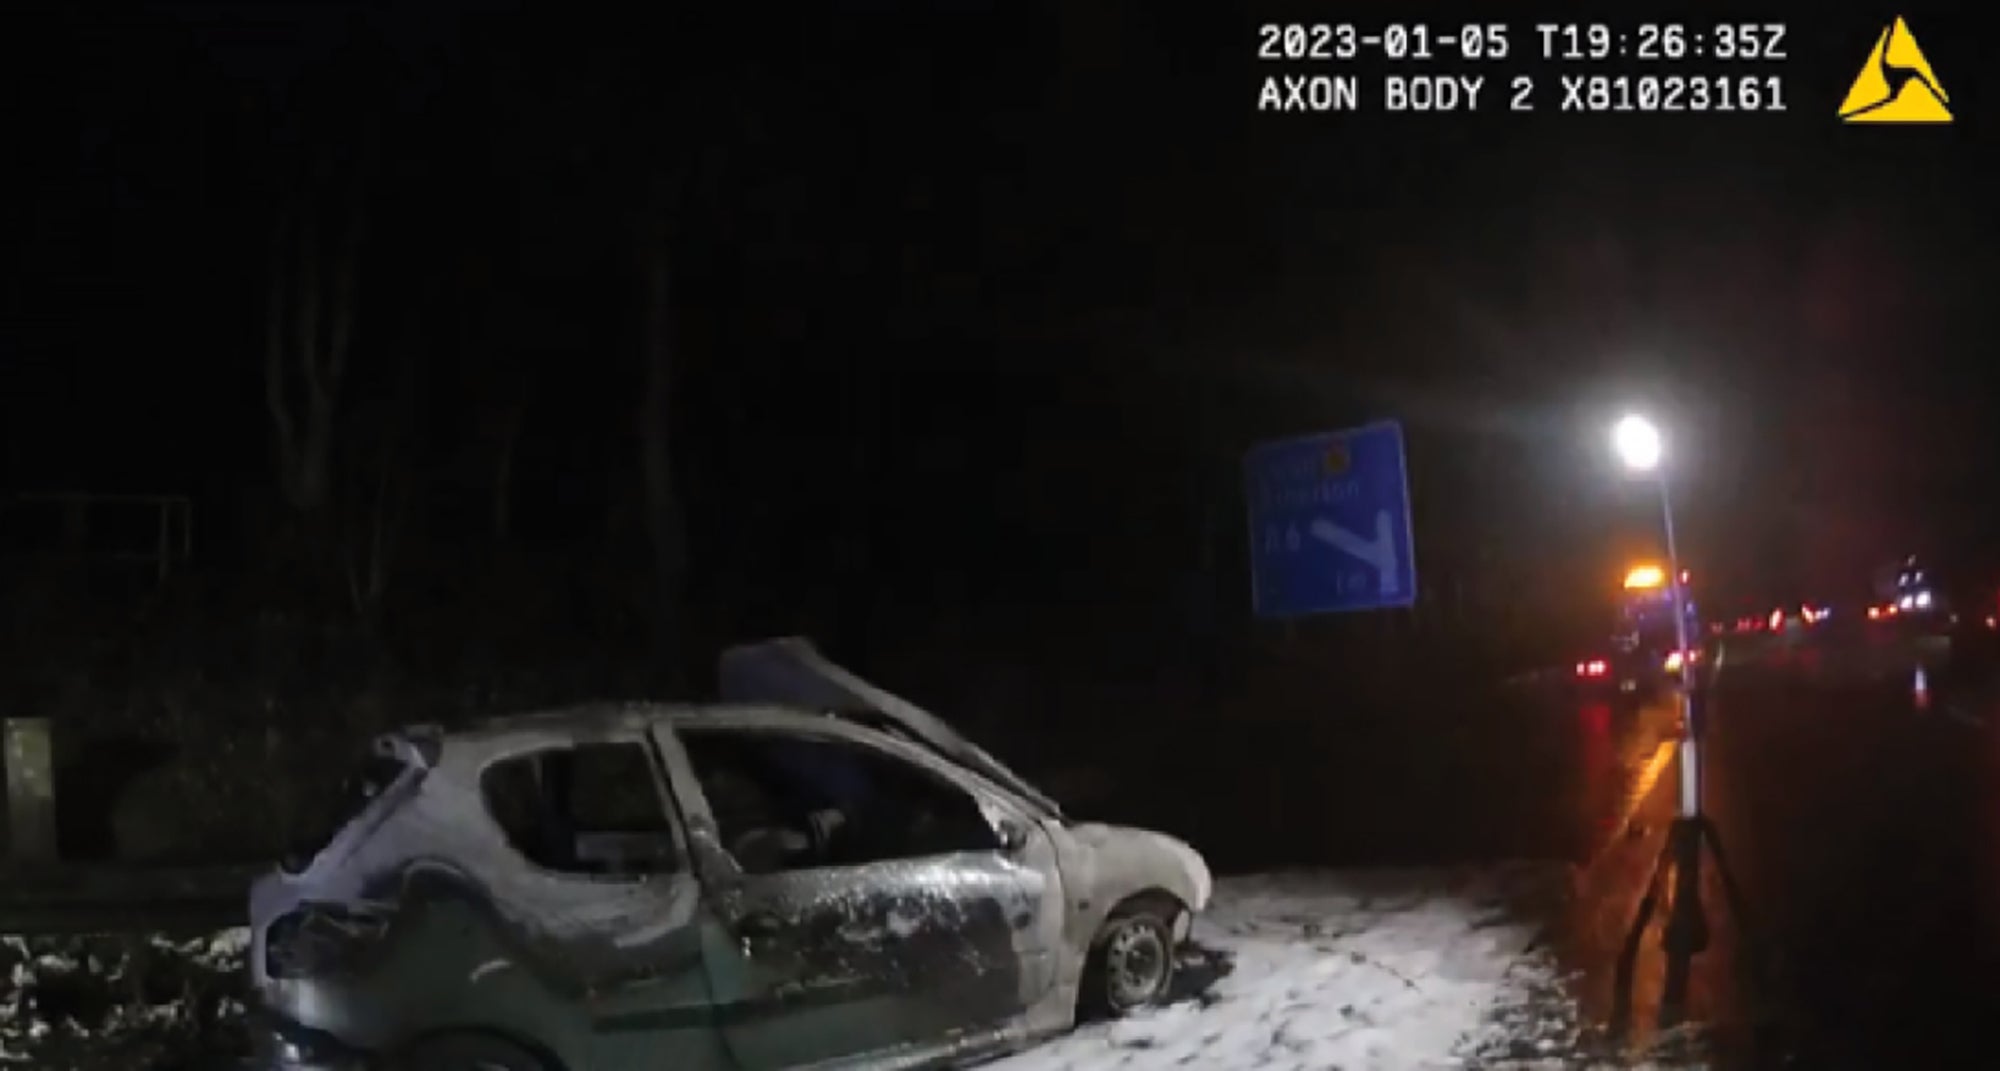 CCTV footage shows the destroyed car